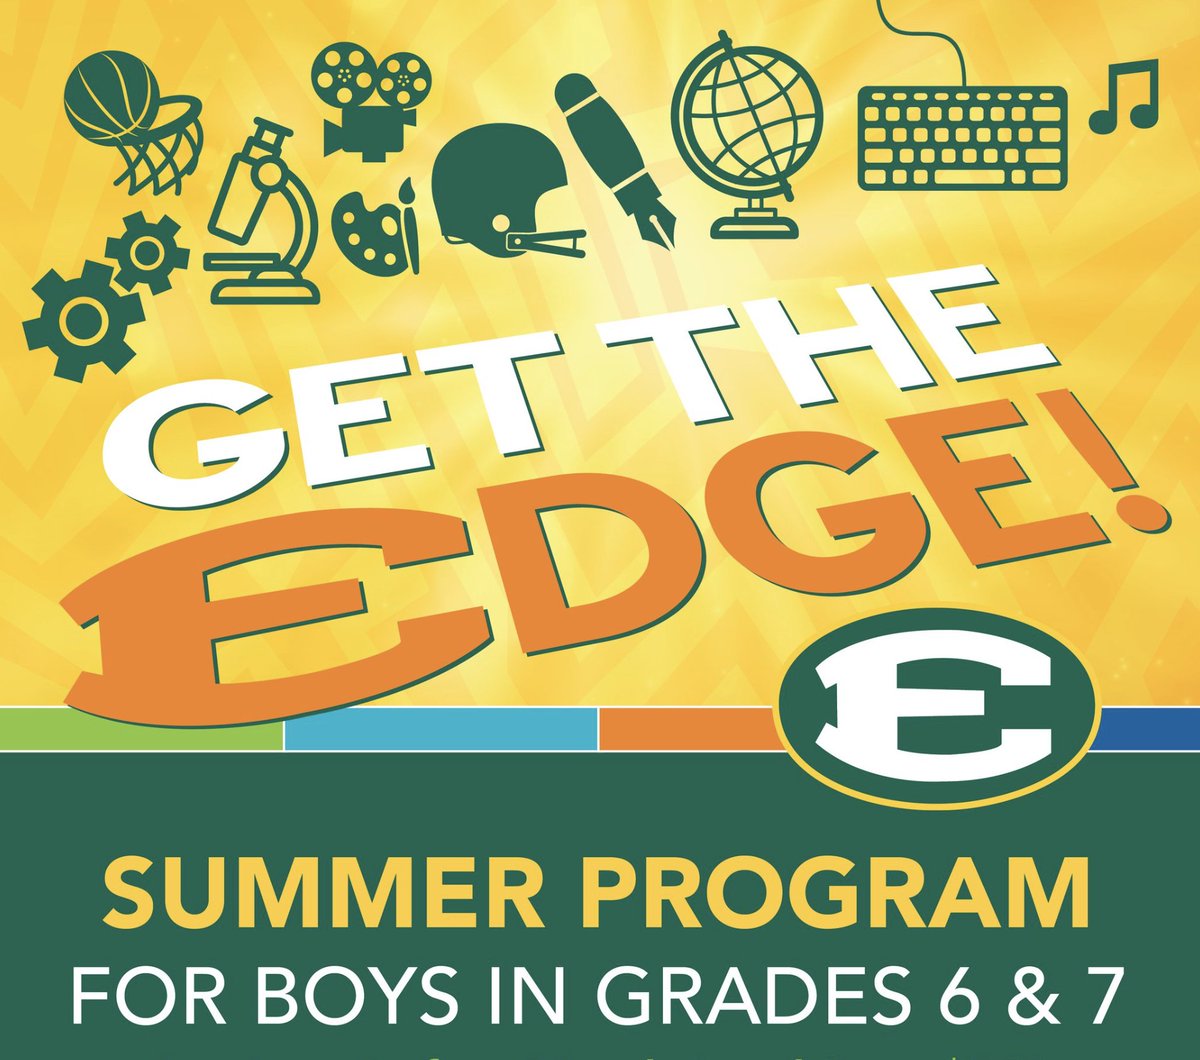 Do you know a young man who will be in grade 7 or 8 next fall? There's still space in our summer enrichment program. Register at sehs.net/camp.